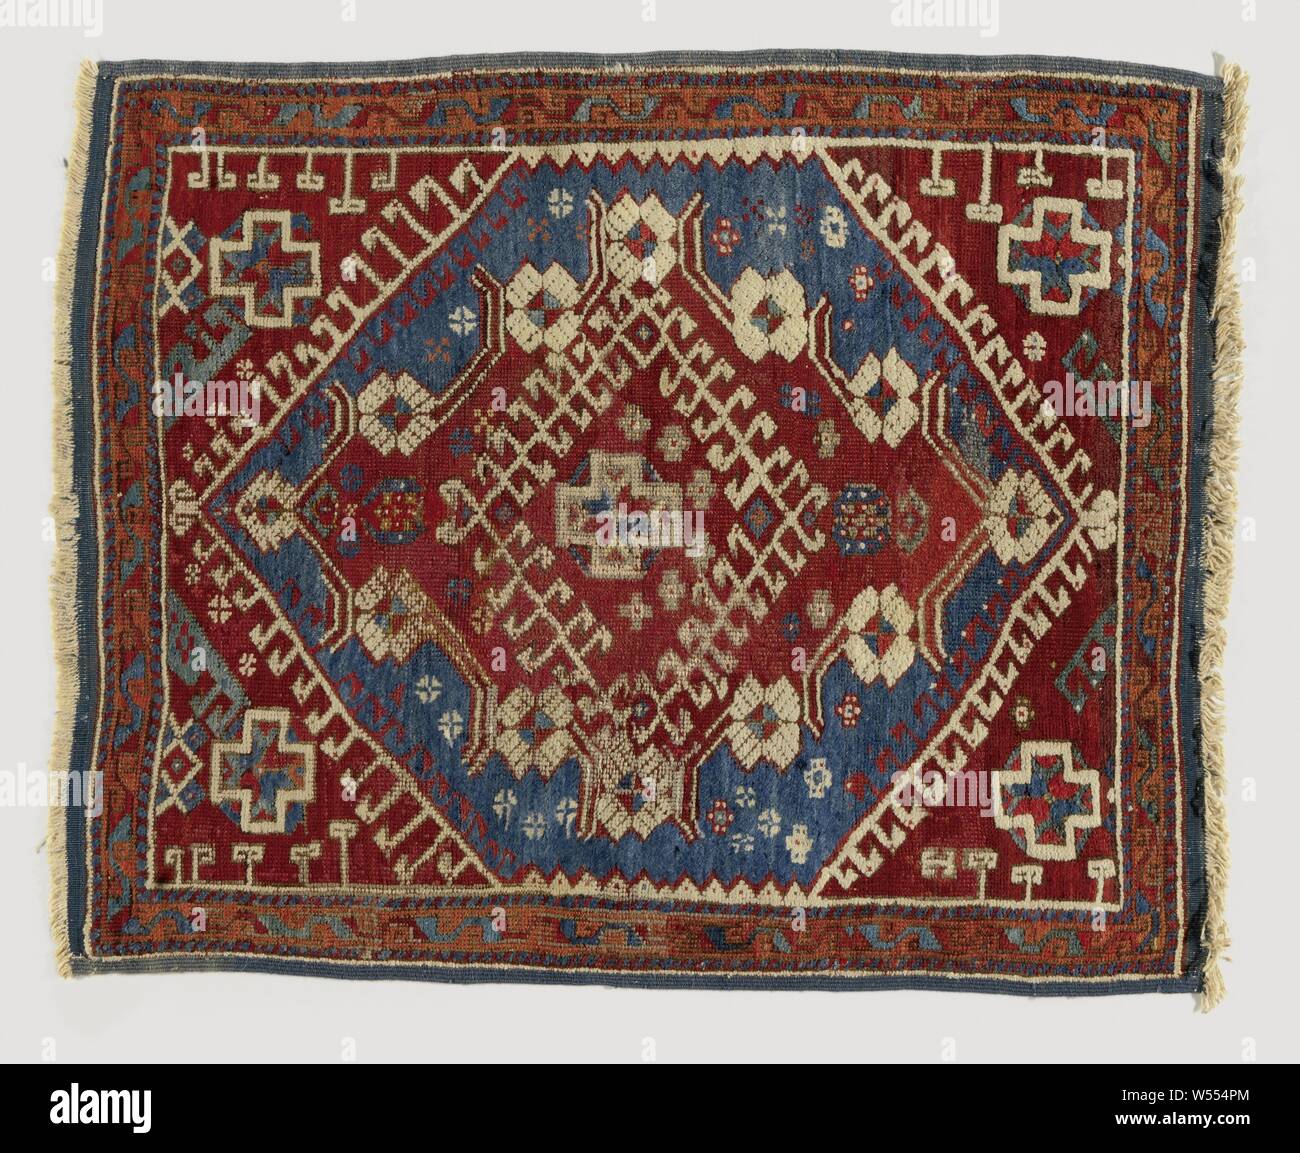 Oriental carpet, medallion rug. In the blue hexagonal center is a concentric diamond, surrounded by hooks and stems with rosette flowers. In the heart a cruciform star flower. Button: Ghiordes button., Yagcibedir (possibly), 1700 - 1900, ketting en inslag, h 117 cm × w 92 cm Stock Photo